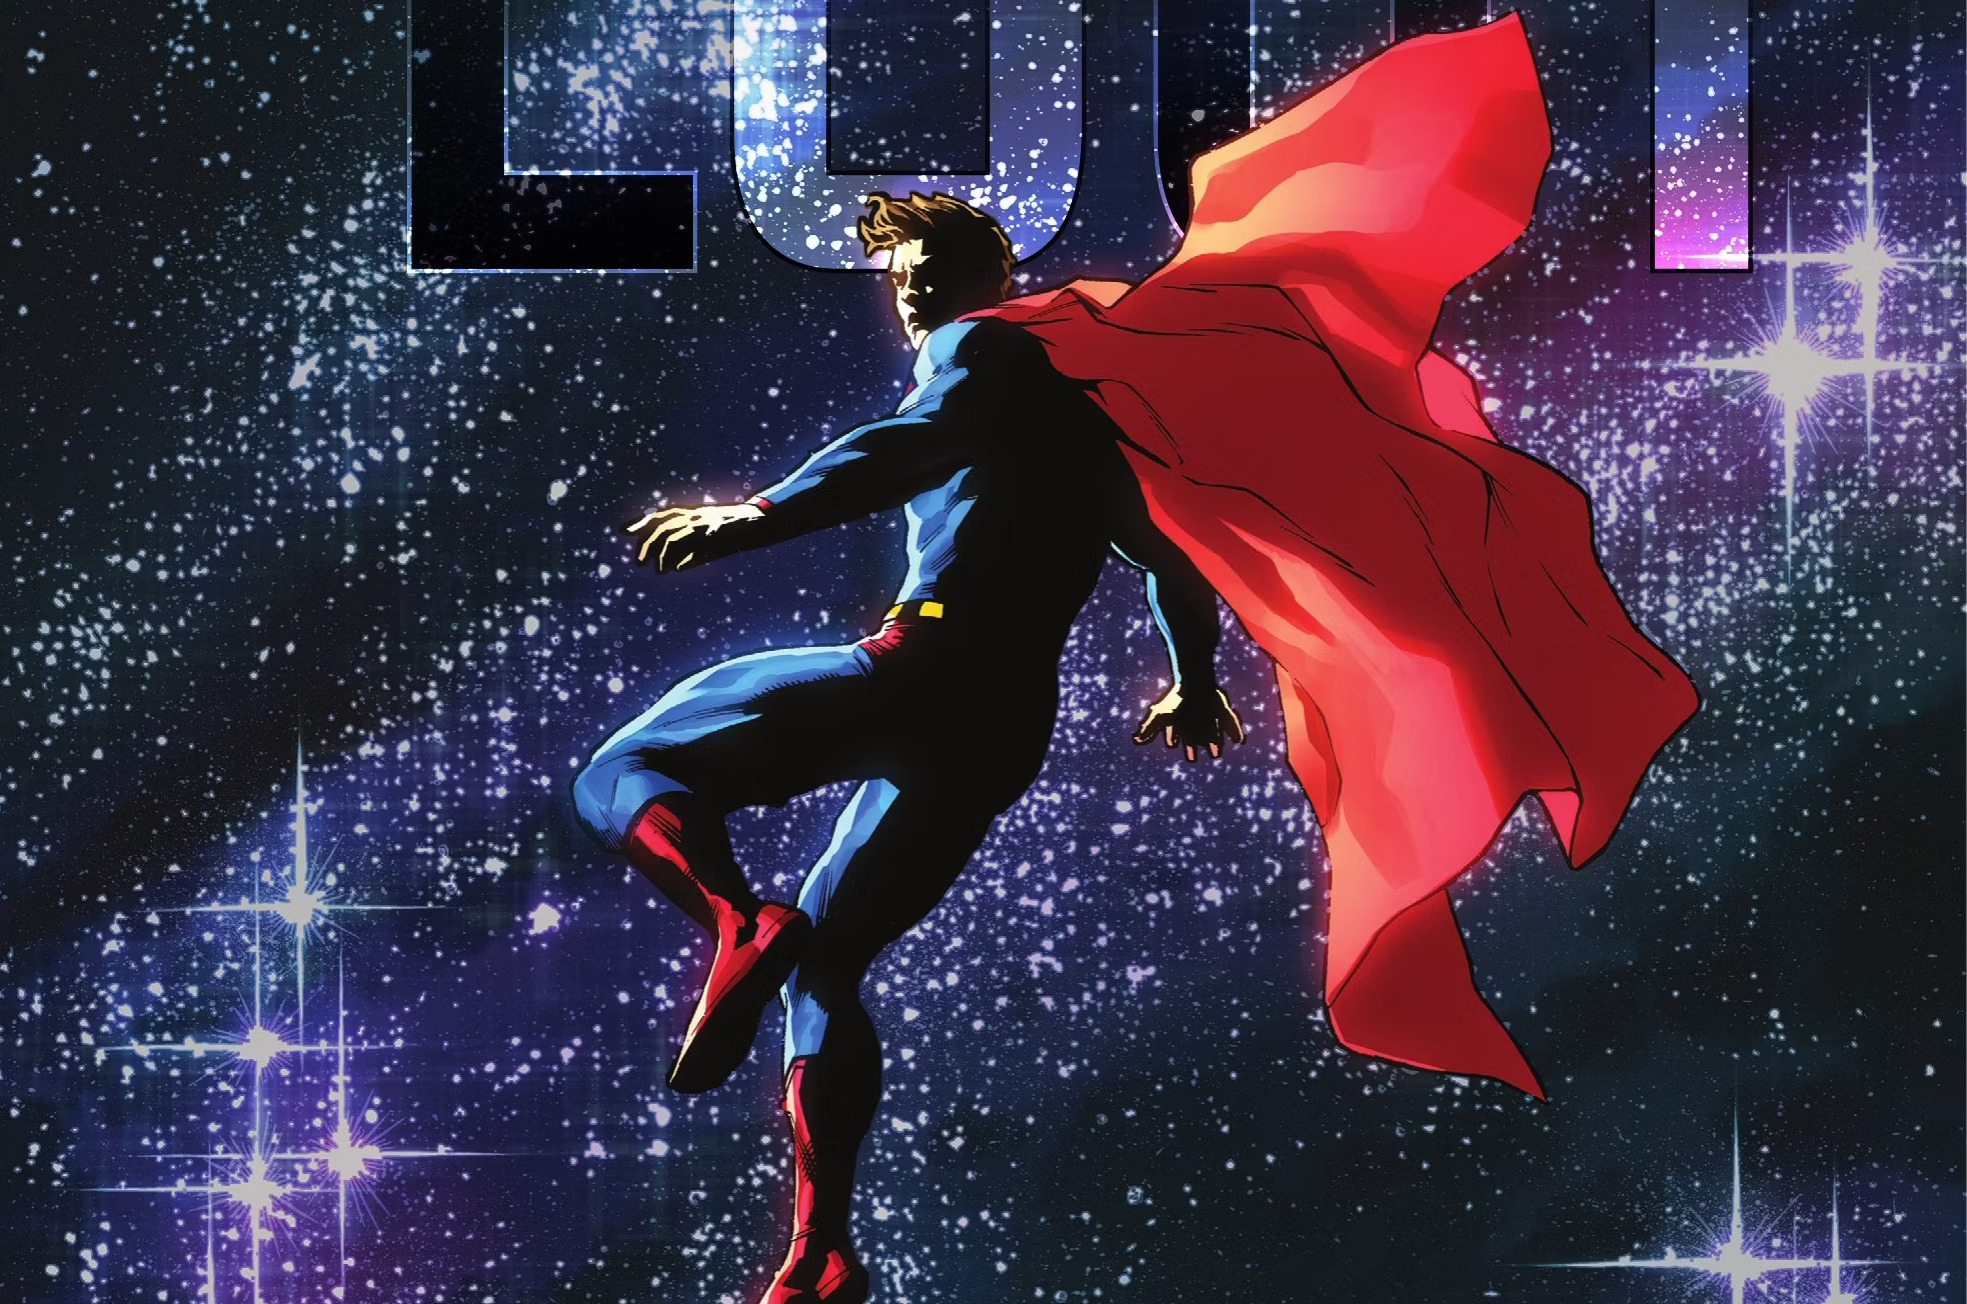 'Superman: Lost' #1 review: In the blink of an eye